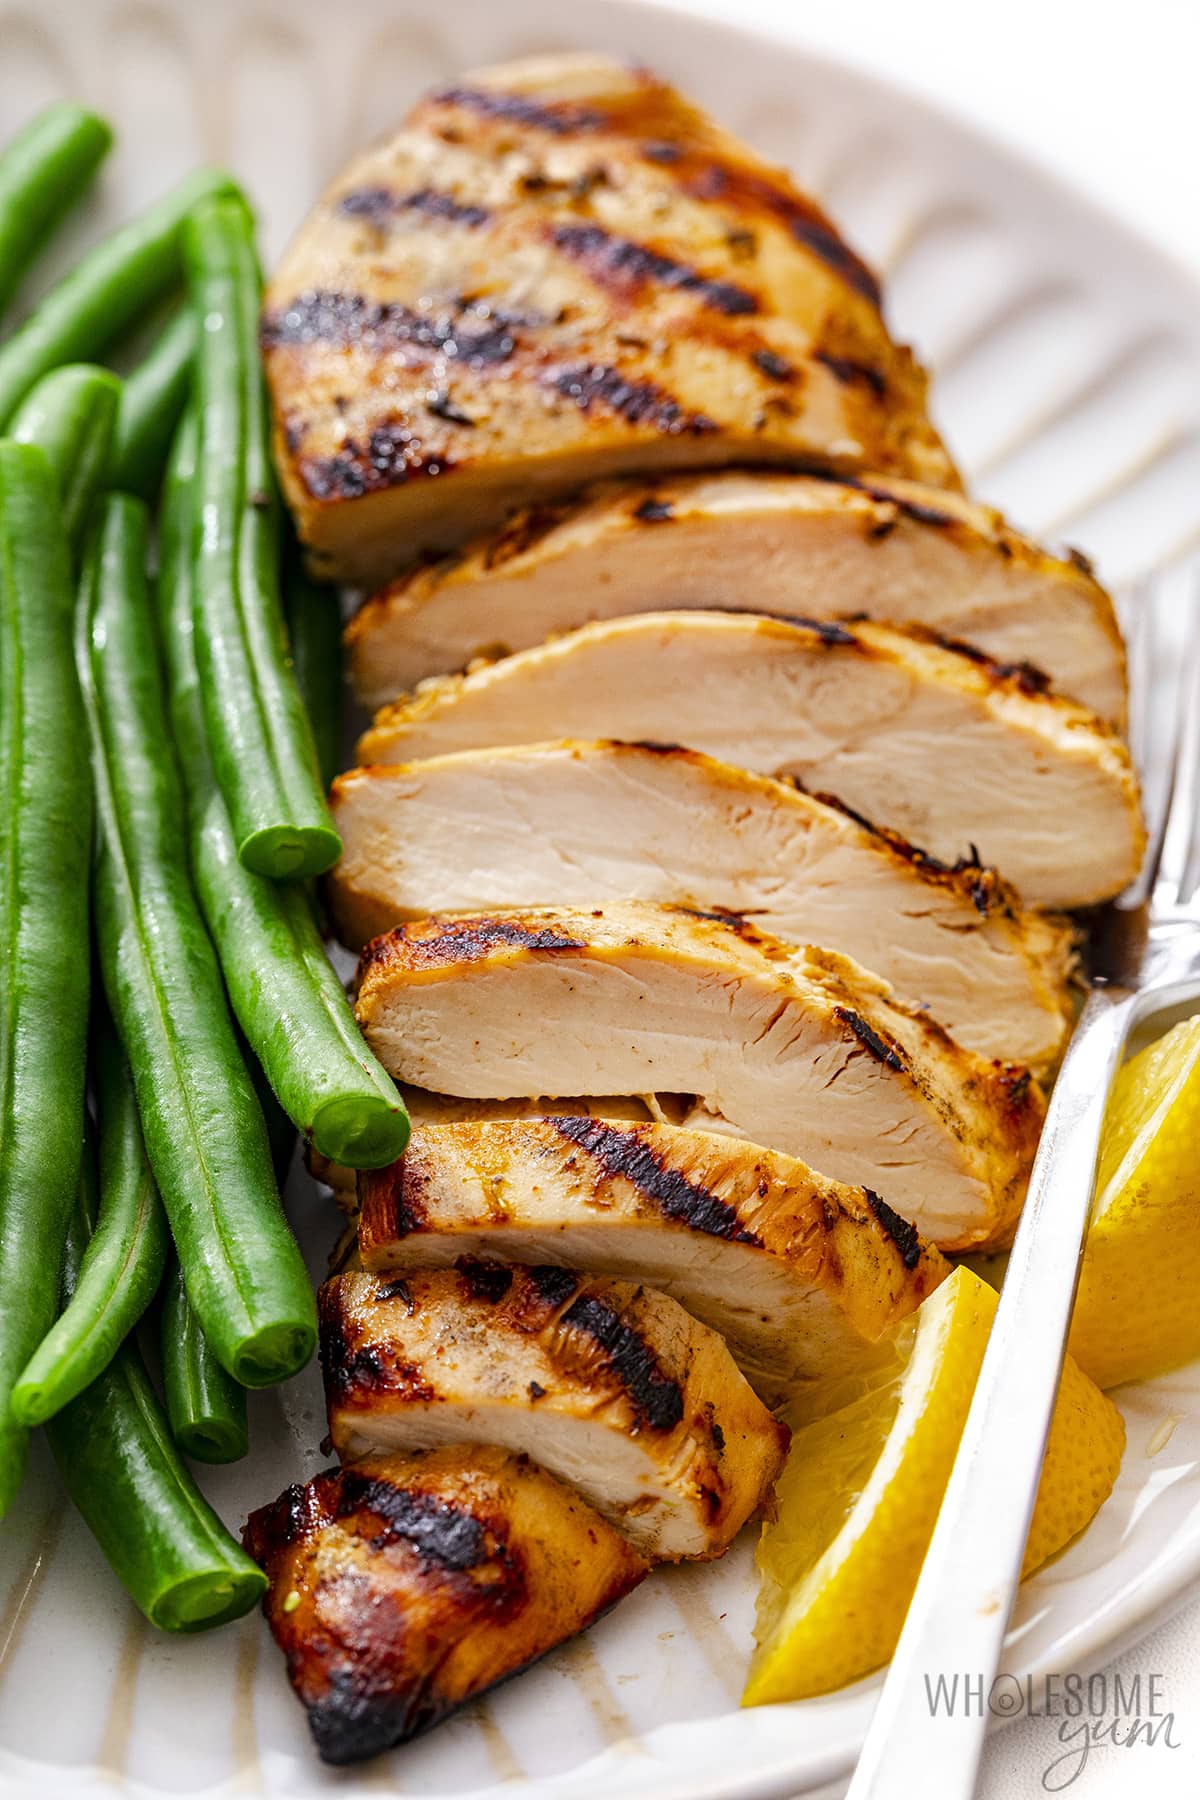 Grilled chicken breast plated with green beans.